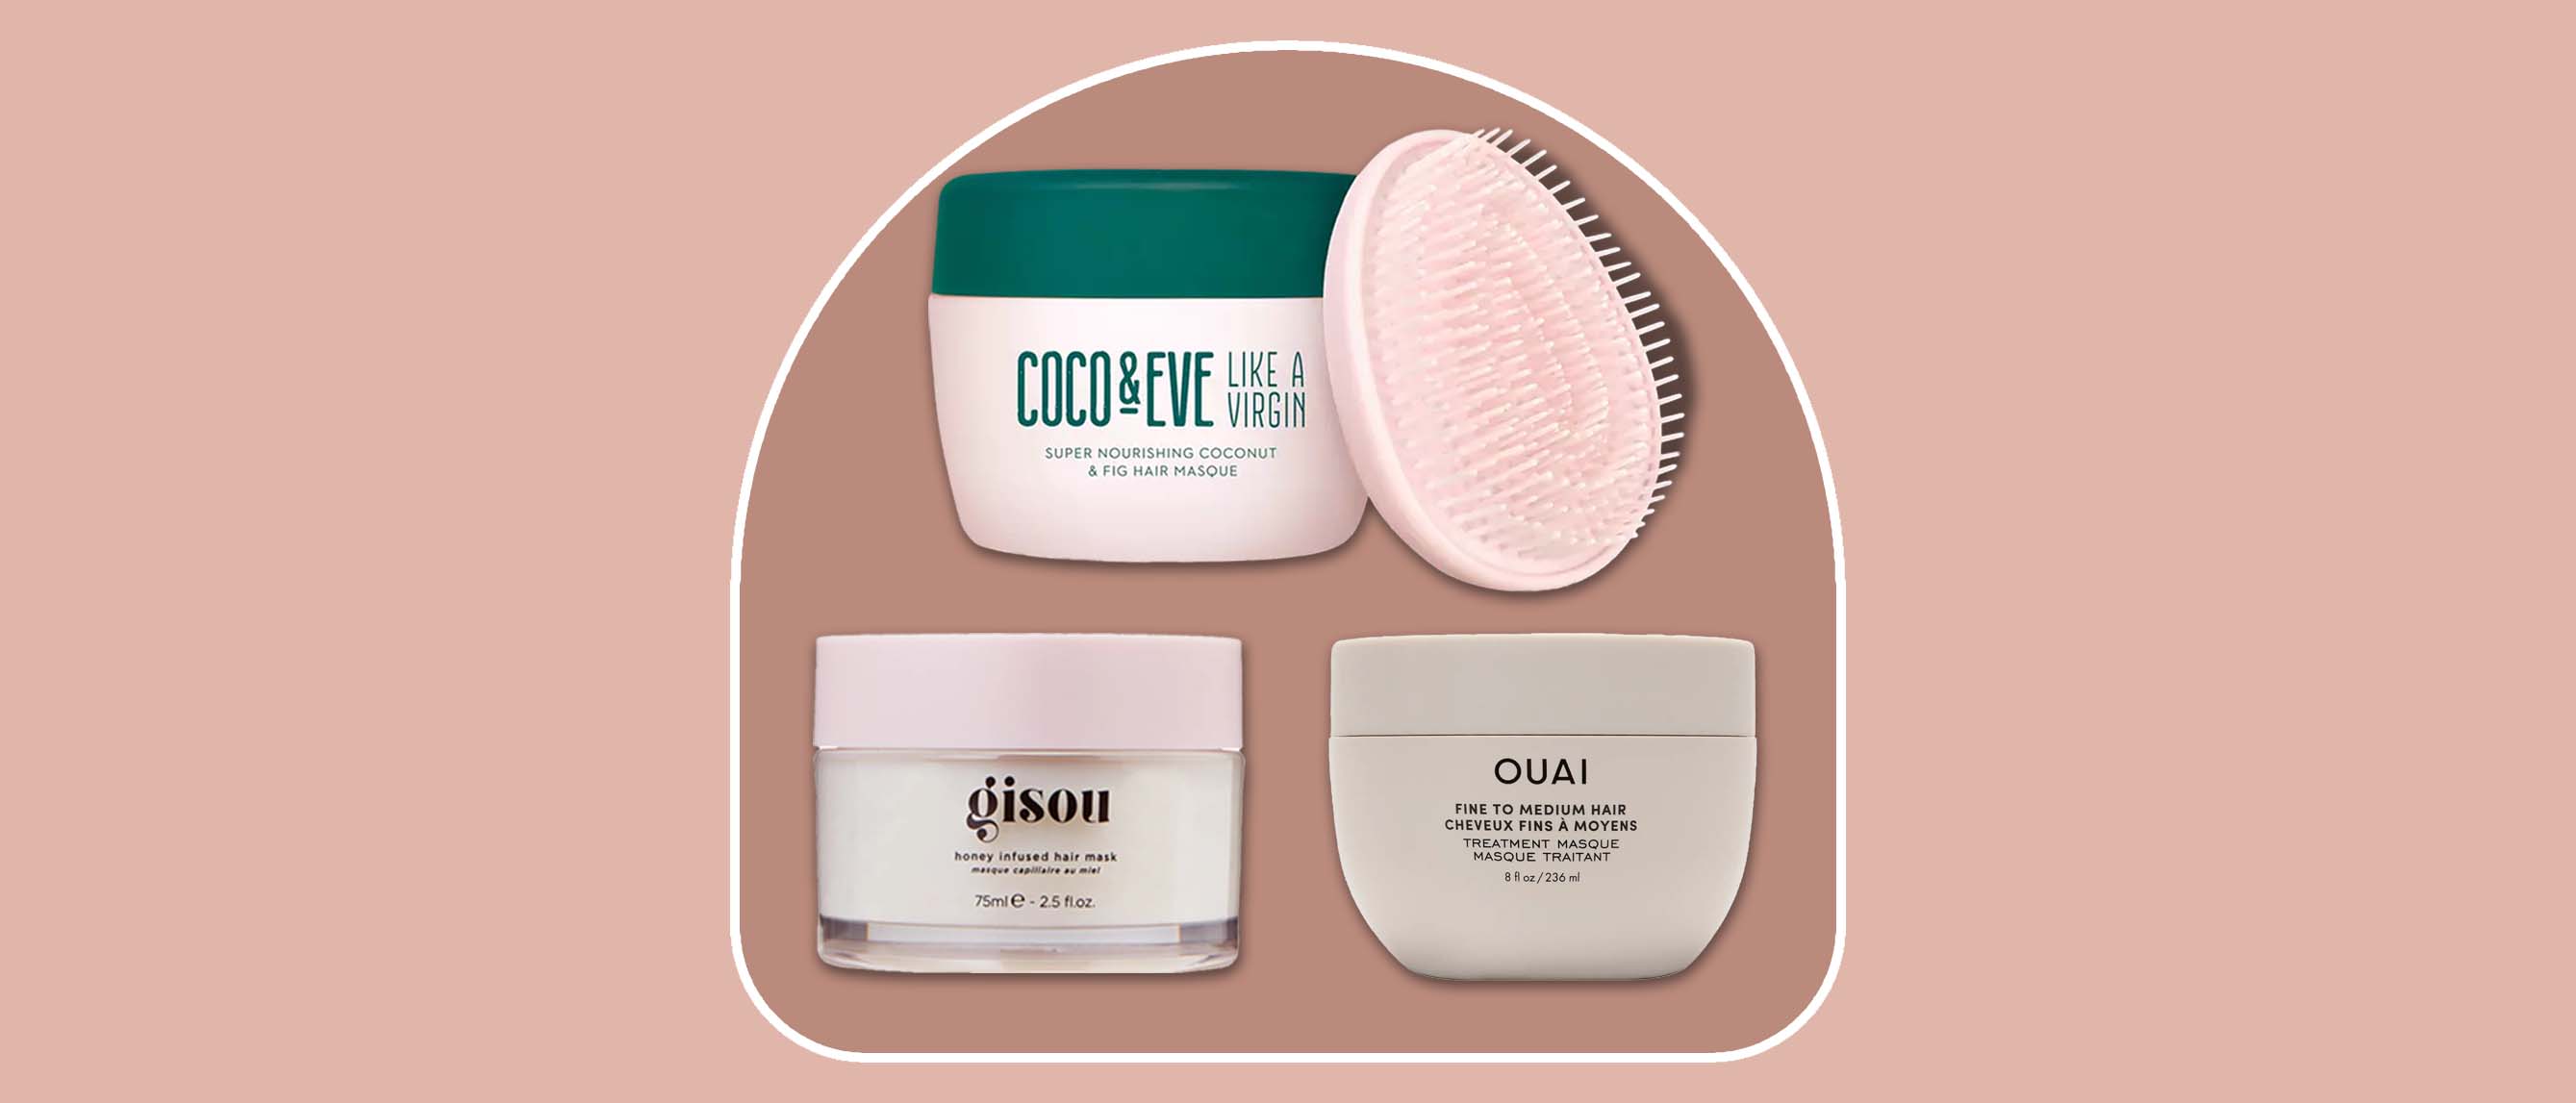 three of the best hair masks including Gisou, OUAI and Coco & Eve